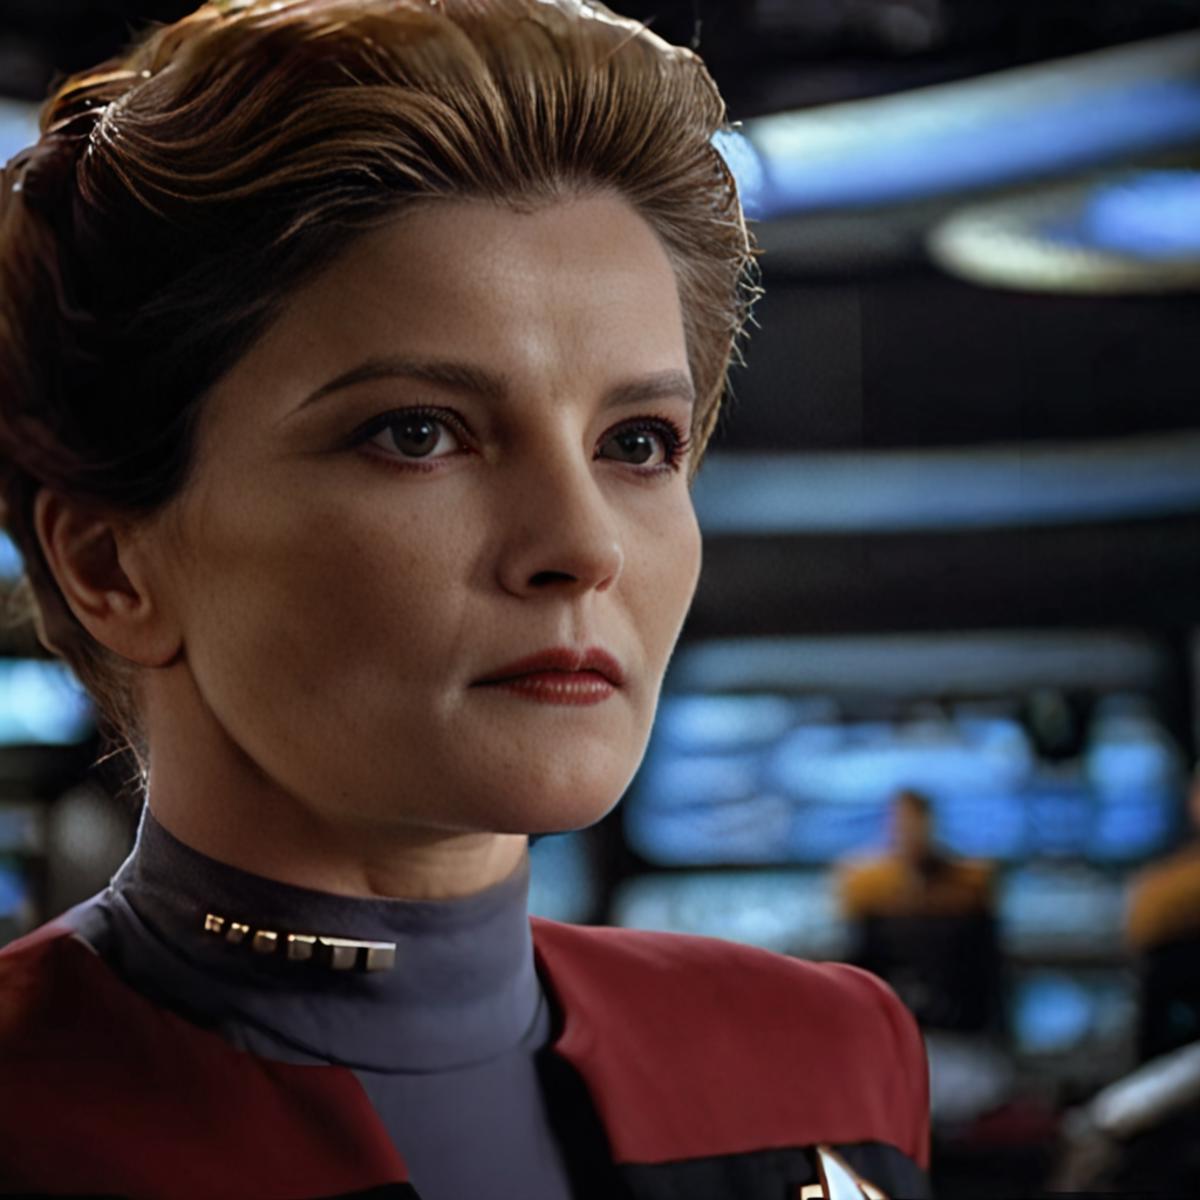 SDXL- Captain Janeway ST Voyager image by efoxxfiles